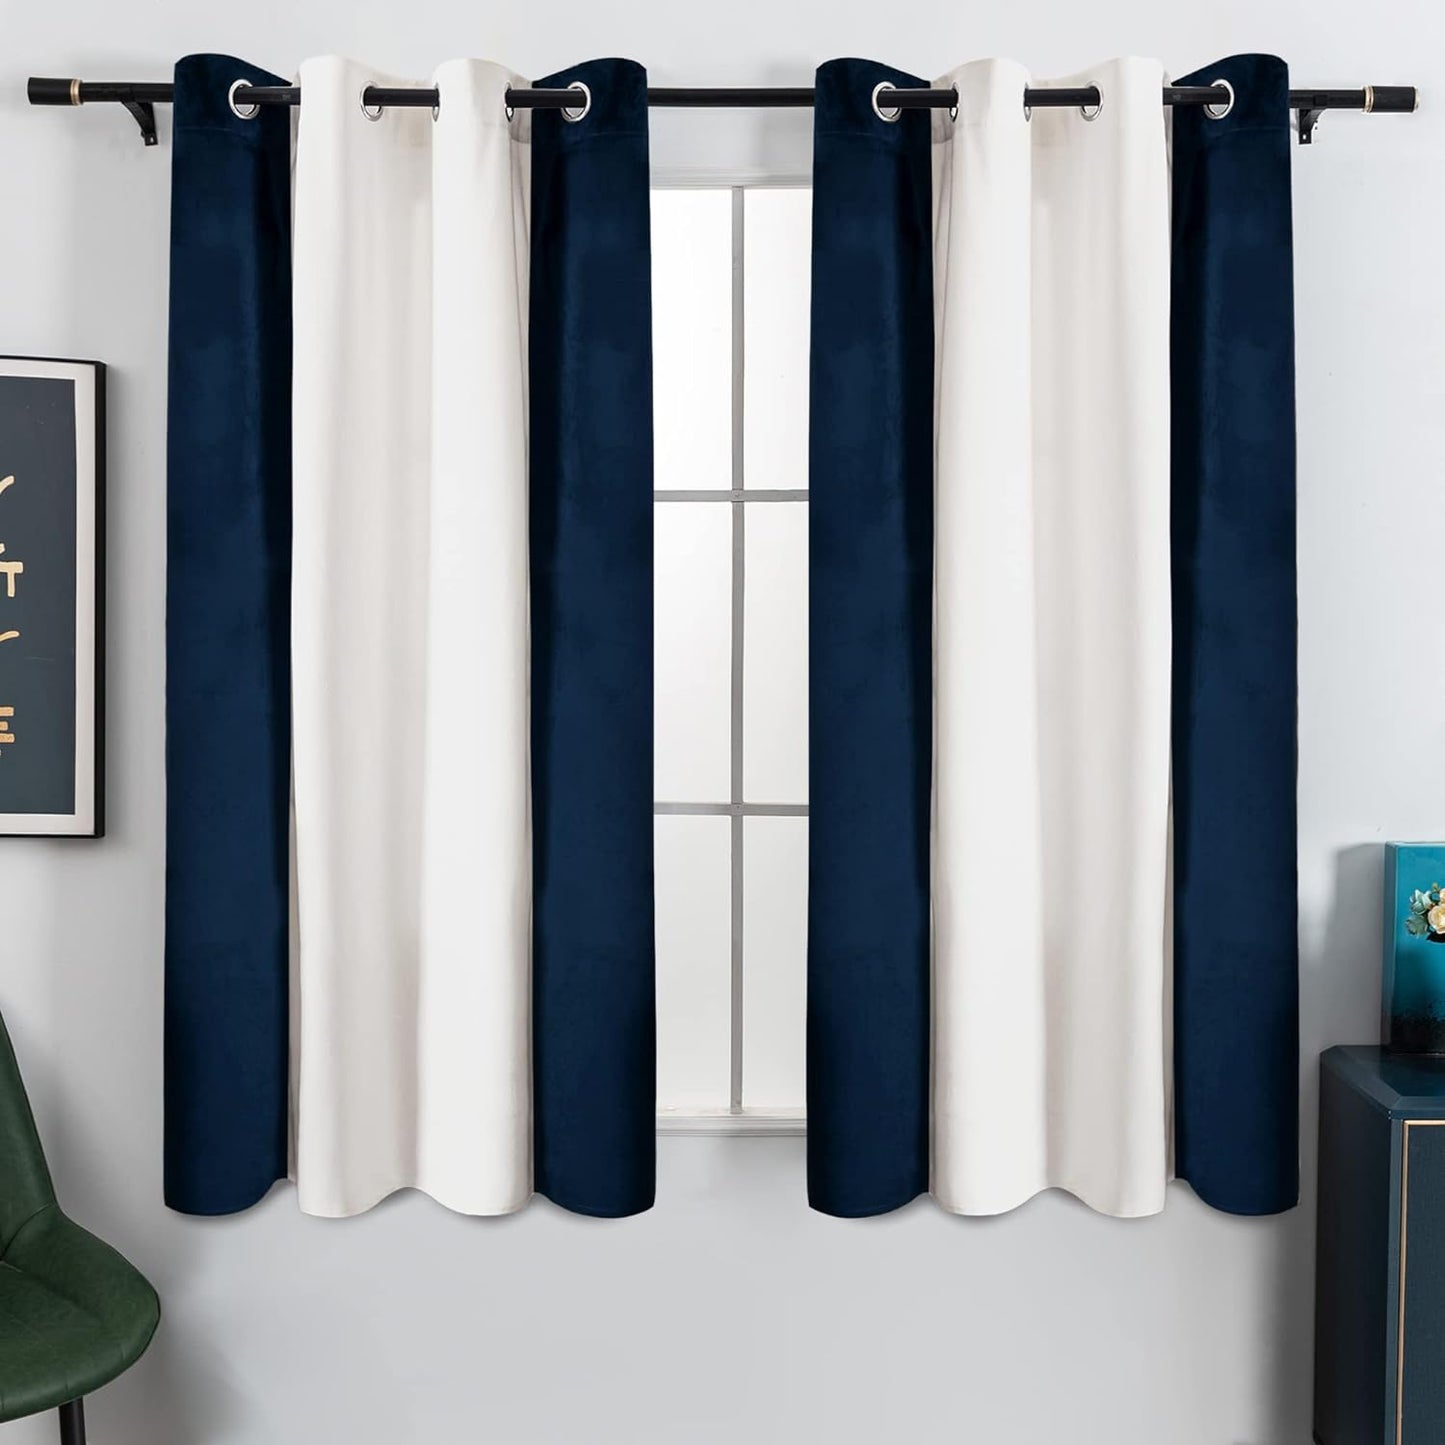 Victree Color Block Velvet Curtains for Bedroom, Patchwork Blackout Curtains 52 X 84 Inch Length - Room Darkening Sun Light Blocking Grommet Window Drapes for Living Room, 2 Panels, Black and White  Victree Navy/White 52 X 63 Inches 